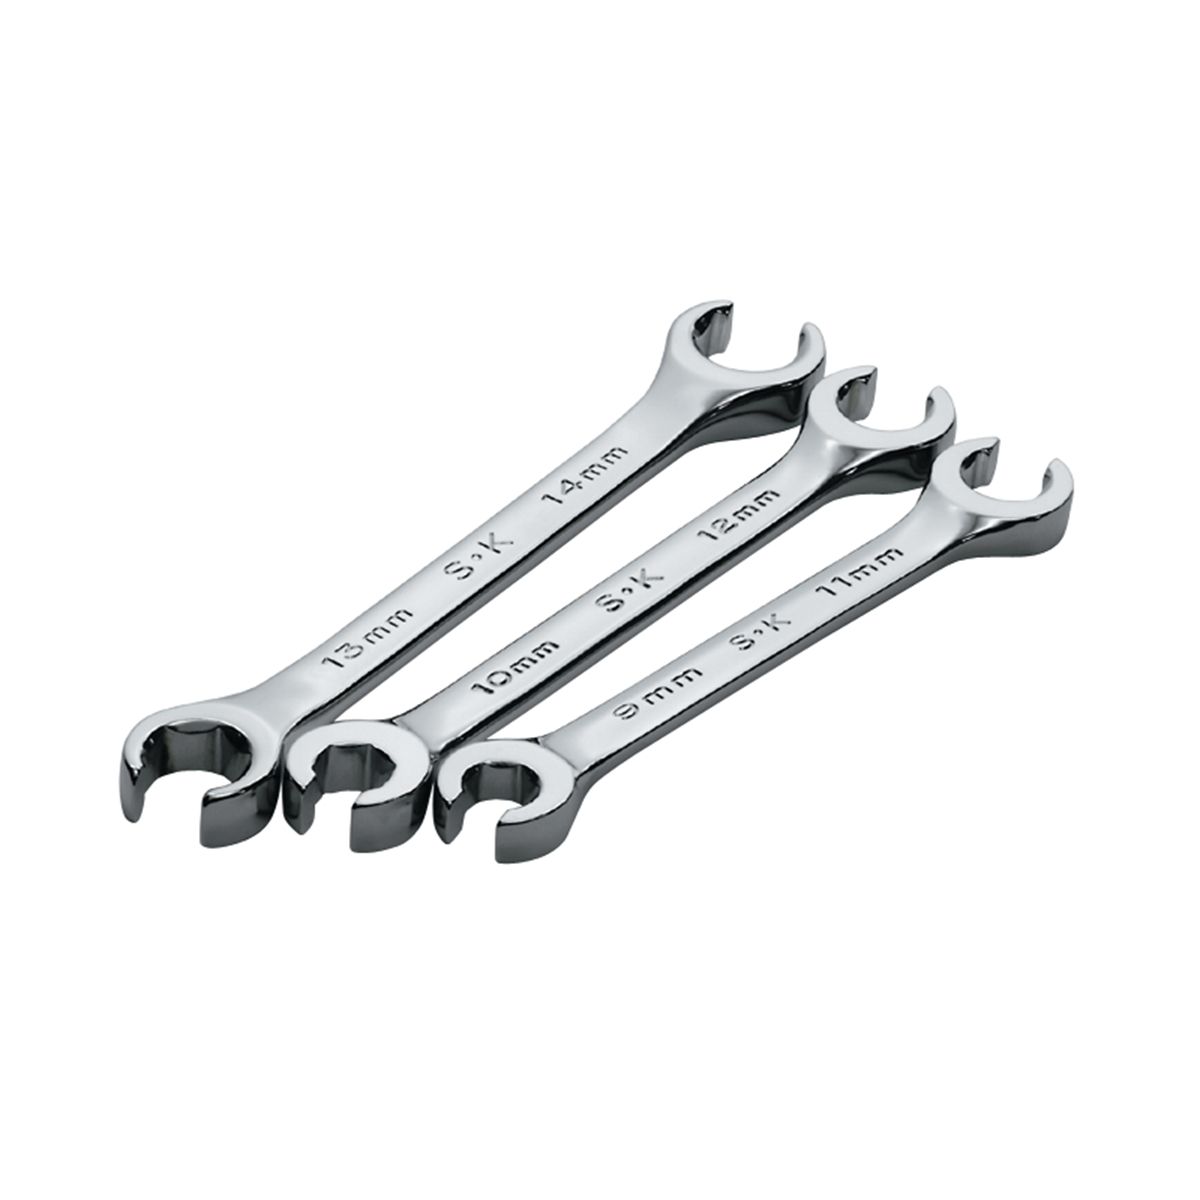 SuperKrome Metric Flare Nut Wrench Set - 3 Piece